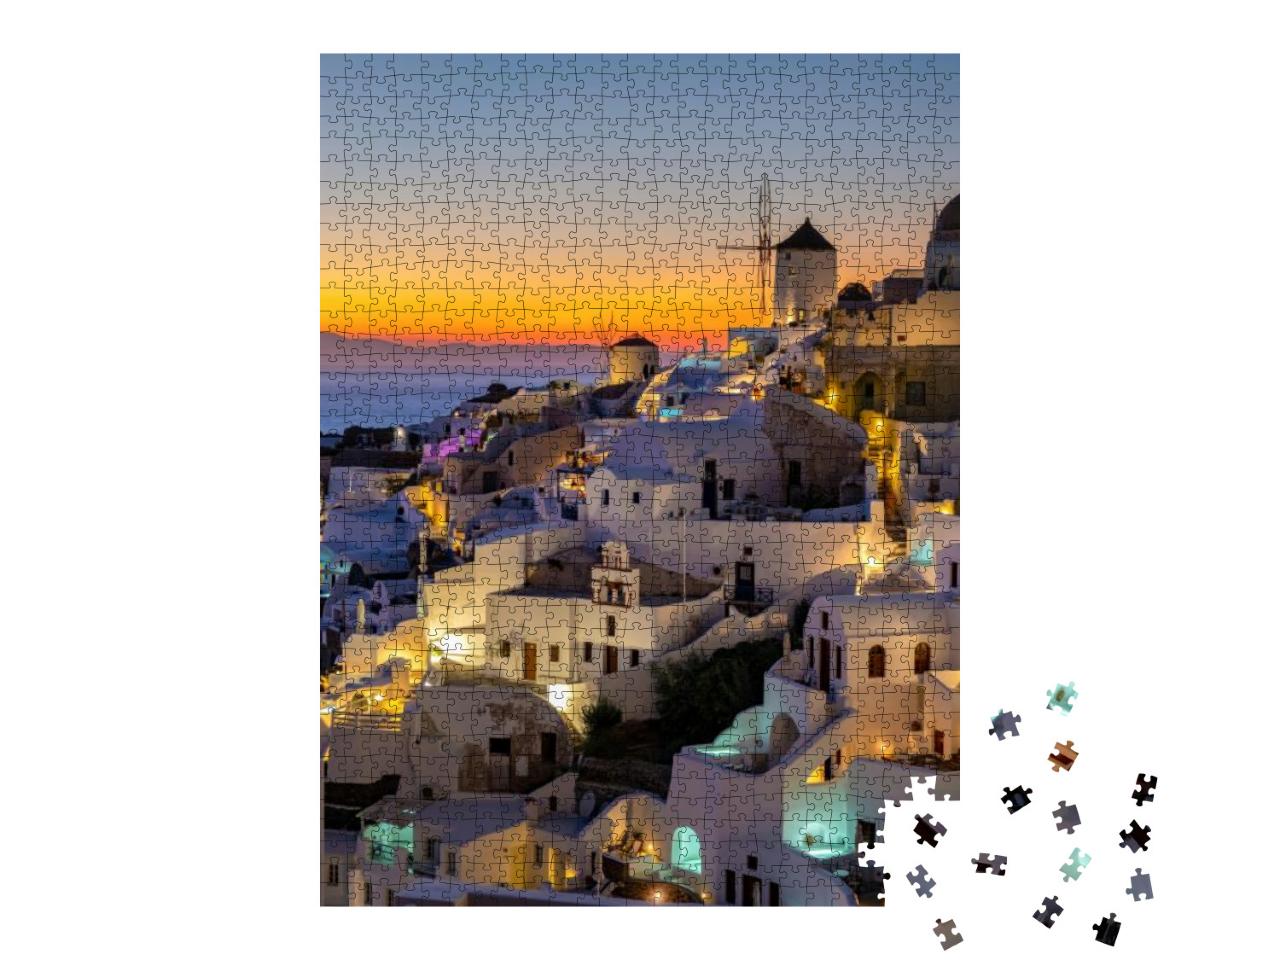 Sunset At the Island of Santorini Greece, Beautiful White... Jigsaw Puzzle with 1000 pieces